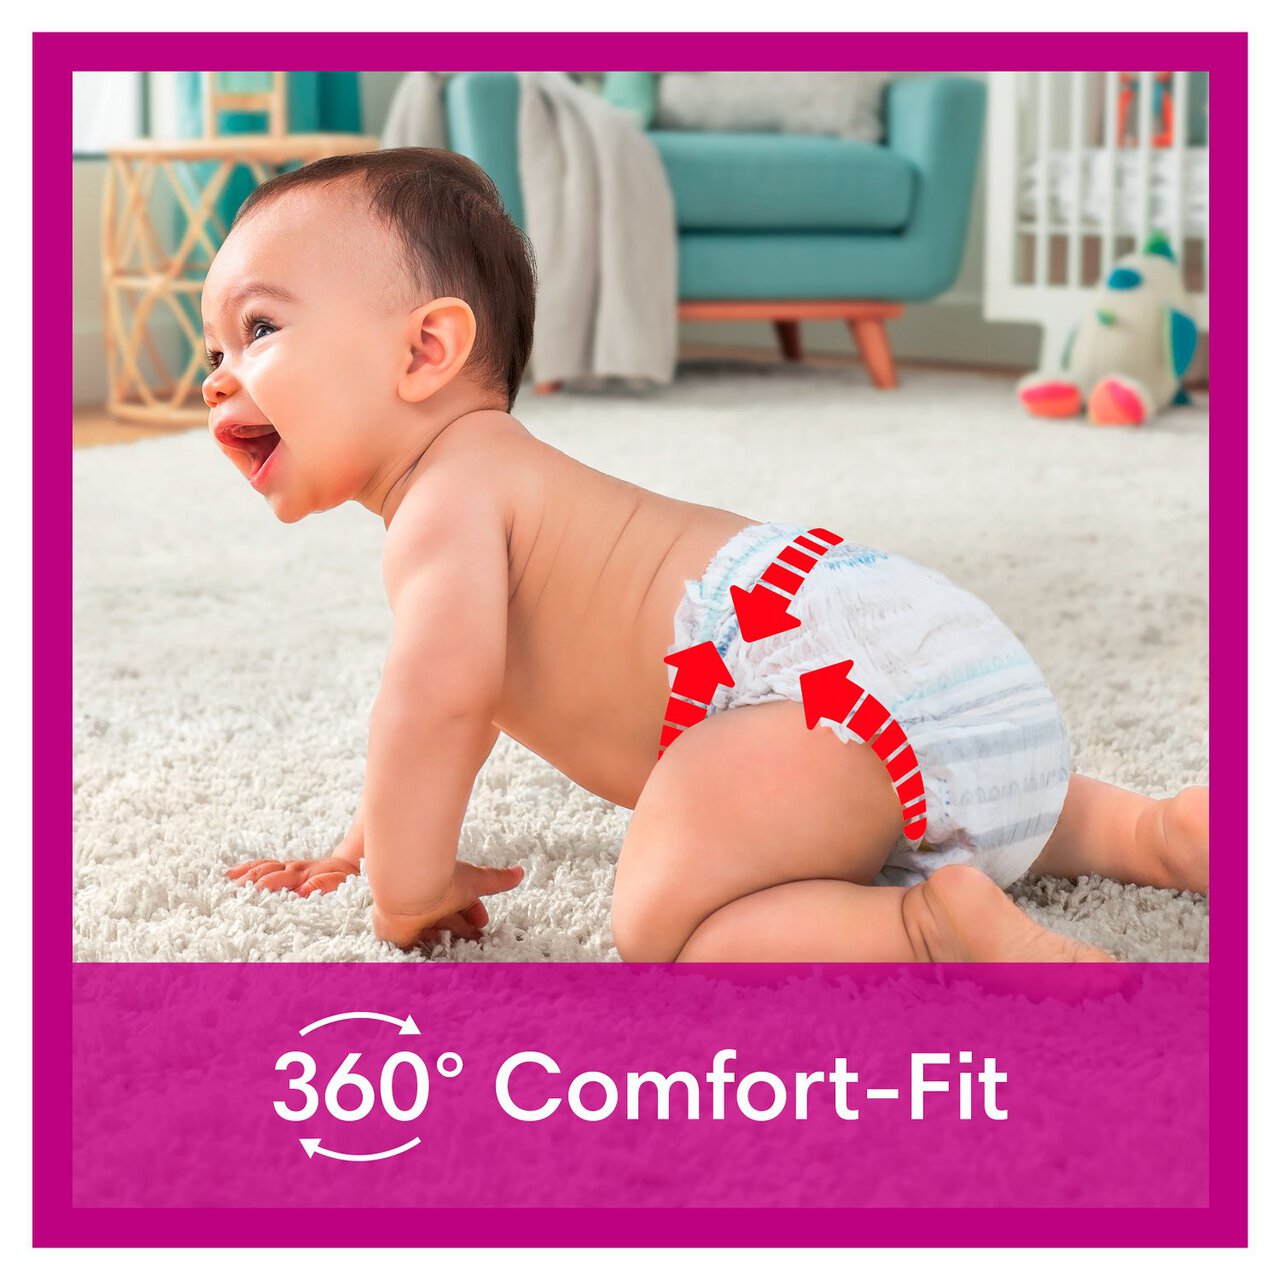 Pampers Active Fit Nappy Pants, Size 5 (12-17kg) Jumbo+ Pack 44 per pack